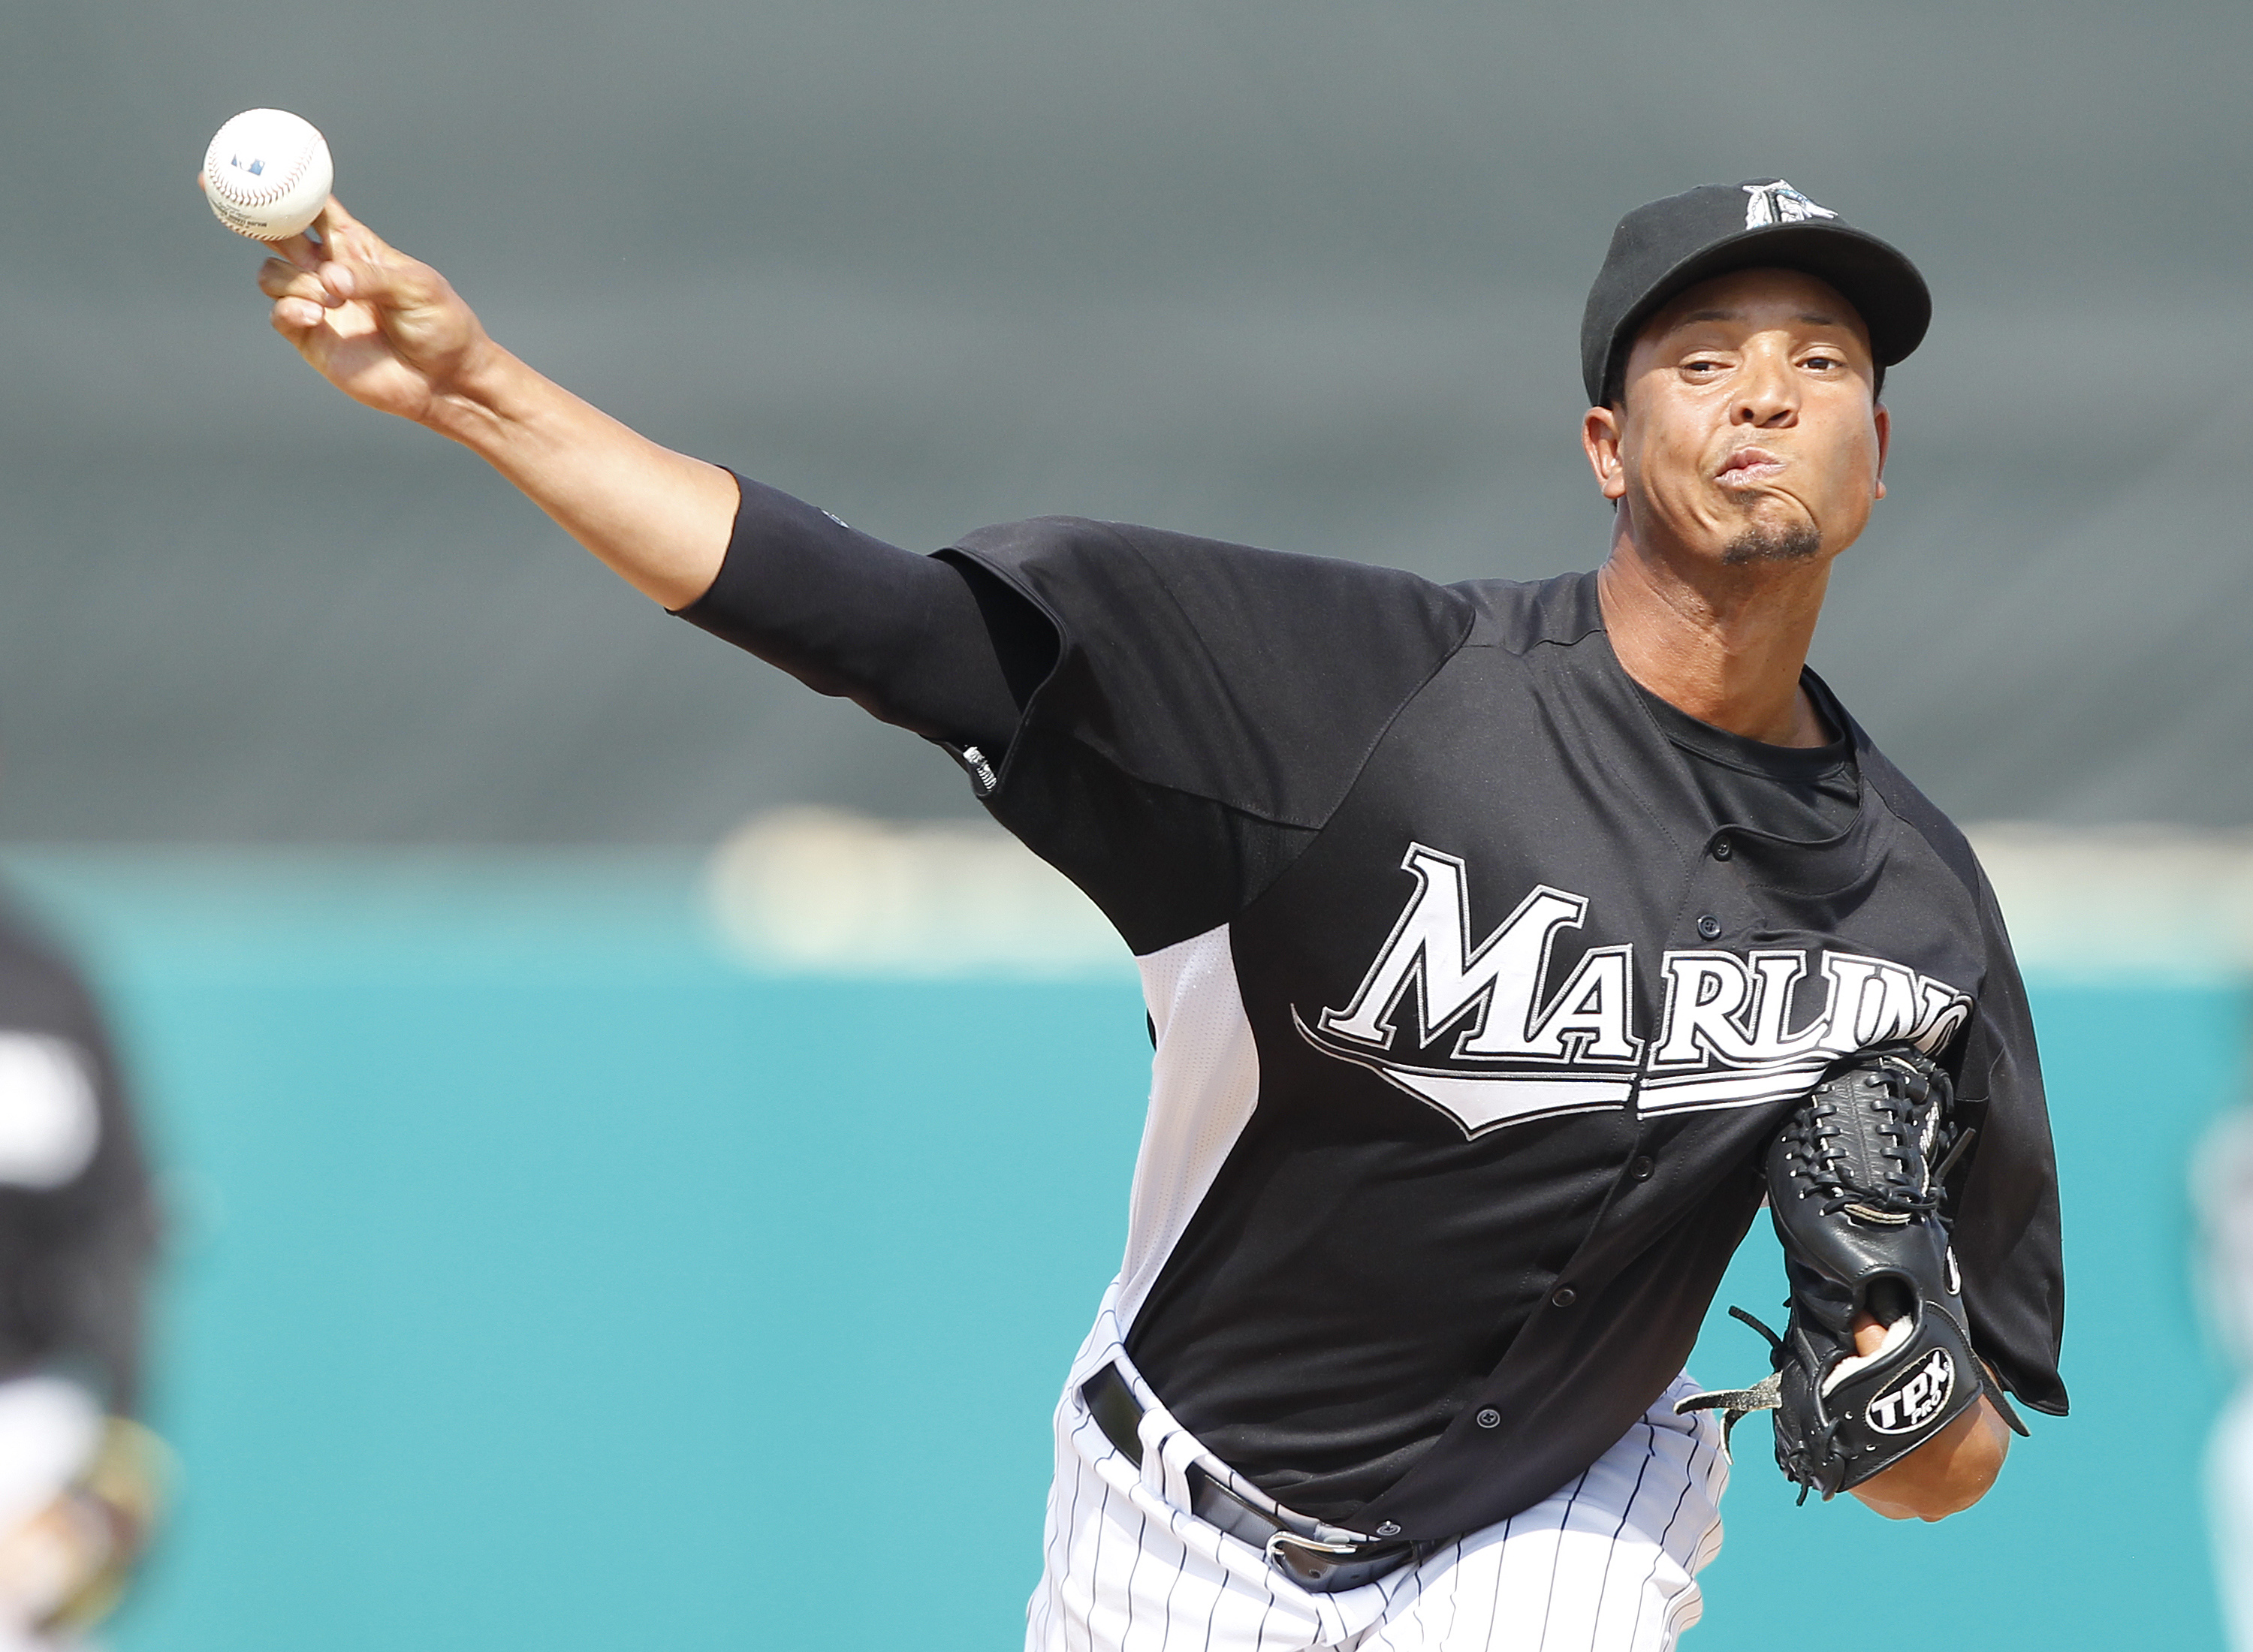 JUPITER, FL - MARCH 24: Leo Nunez #46 of the Florida Marlins prepares to pitch the final inning against the Boston Red Sox at Roger Dean Stadium on March 24, 2011 in Jupiter, Florida. The Marlins defeated the Red Sox 15-7. (Photo by Joel Auerbach/Getty Im